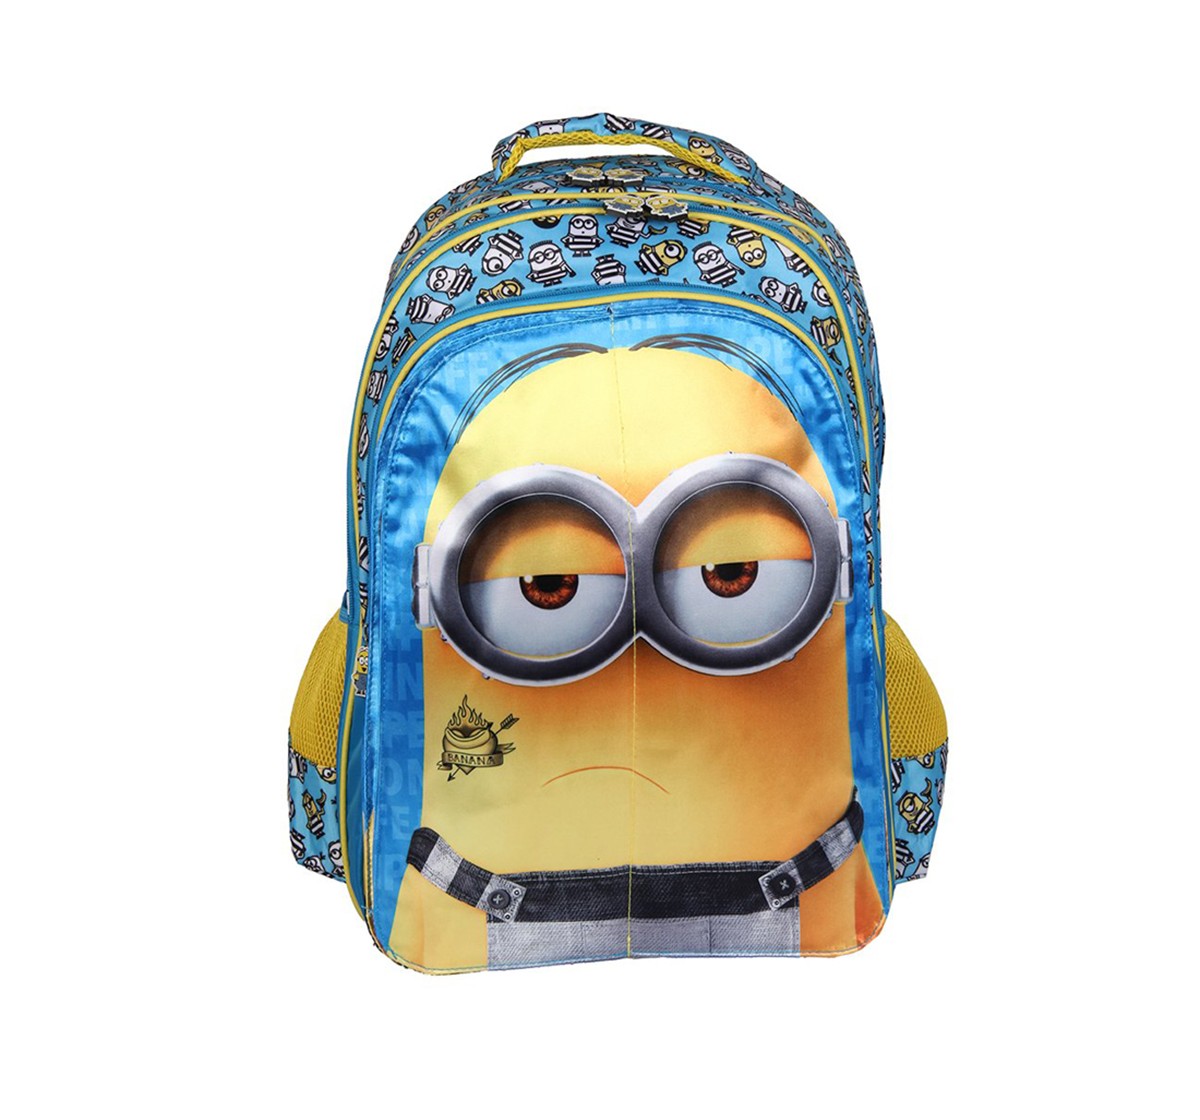 Minions Despicable Me 2 Bag for Kids age 3Y+ 